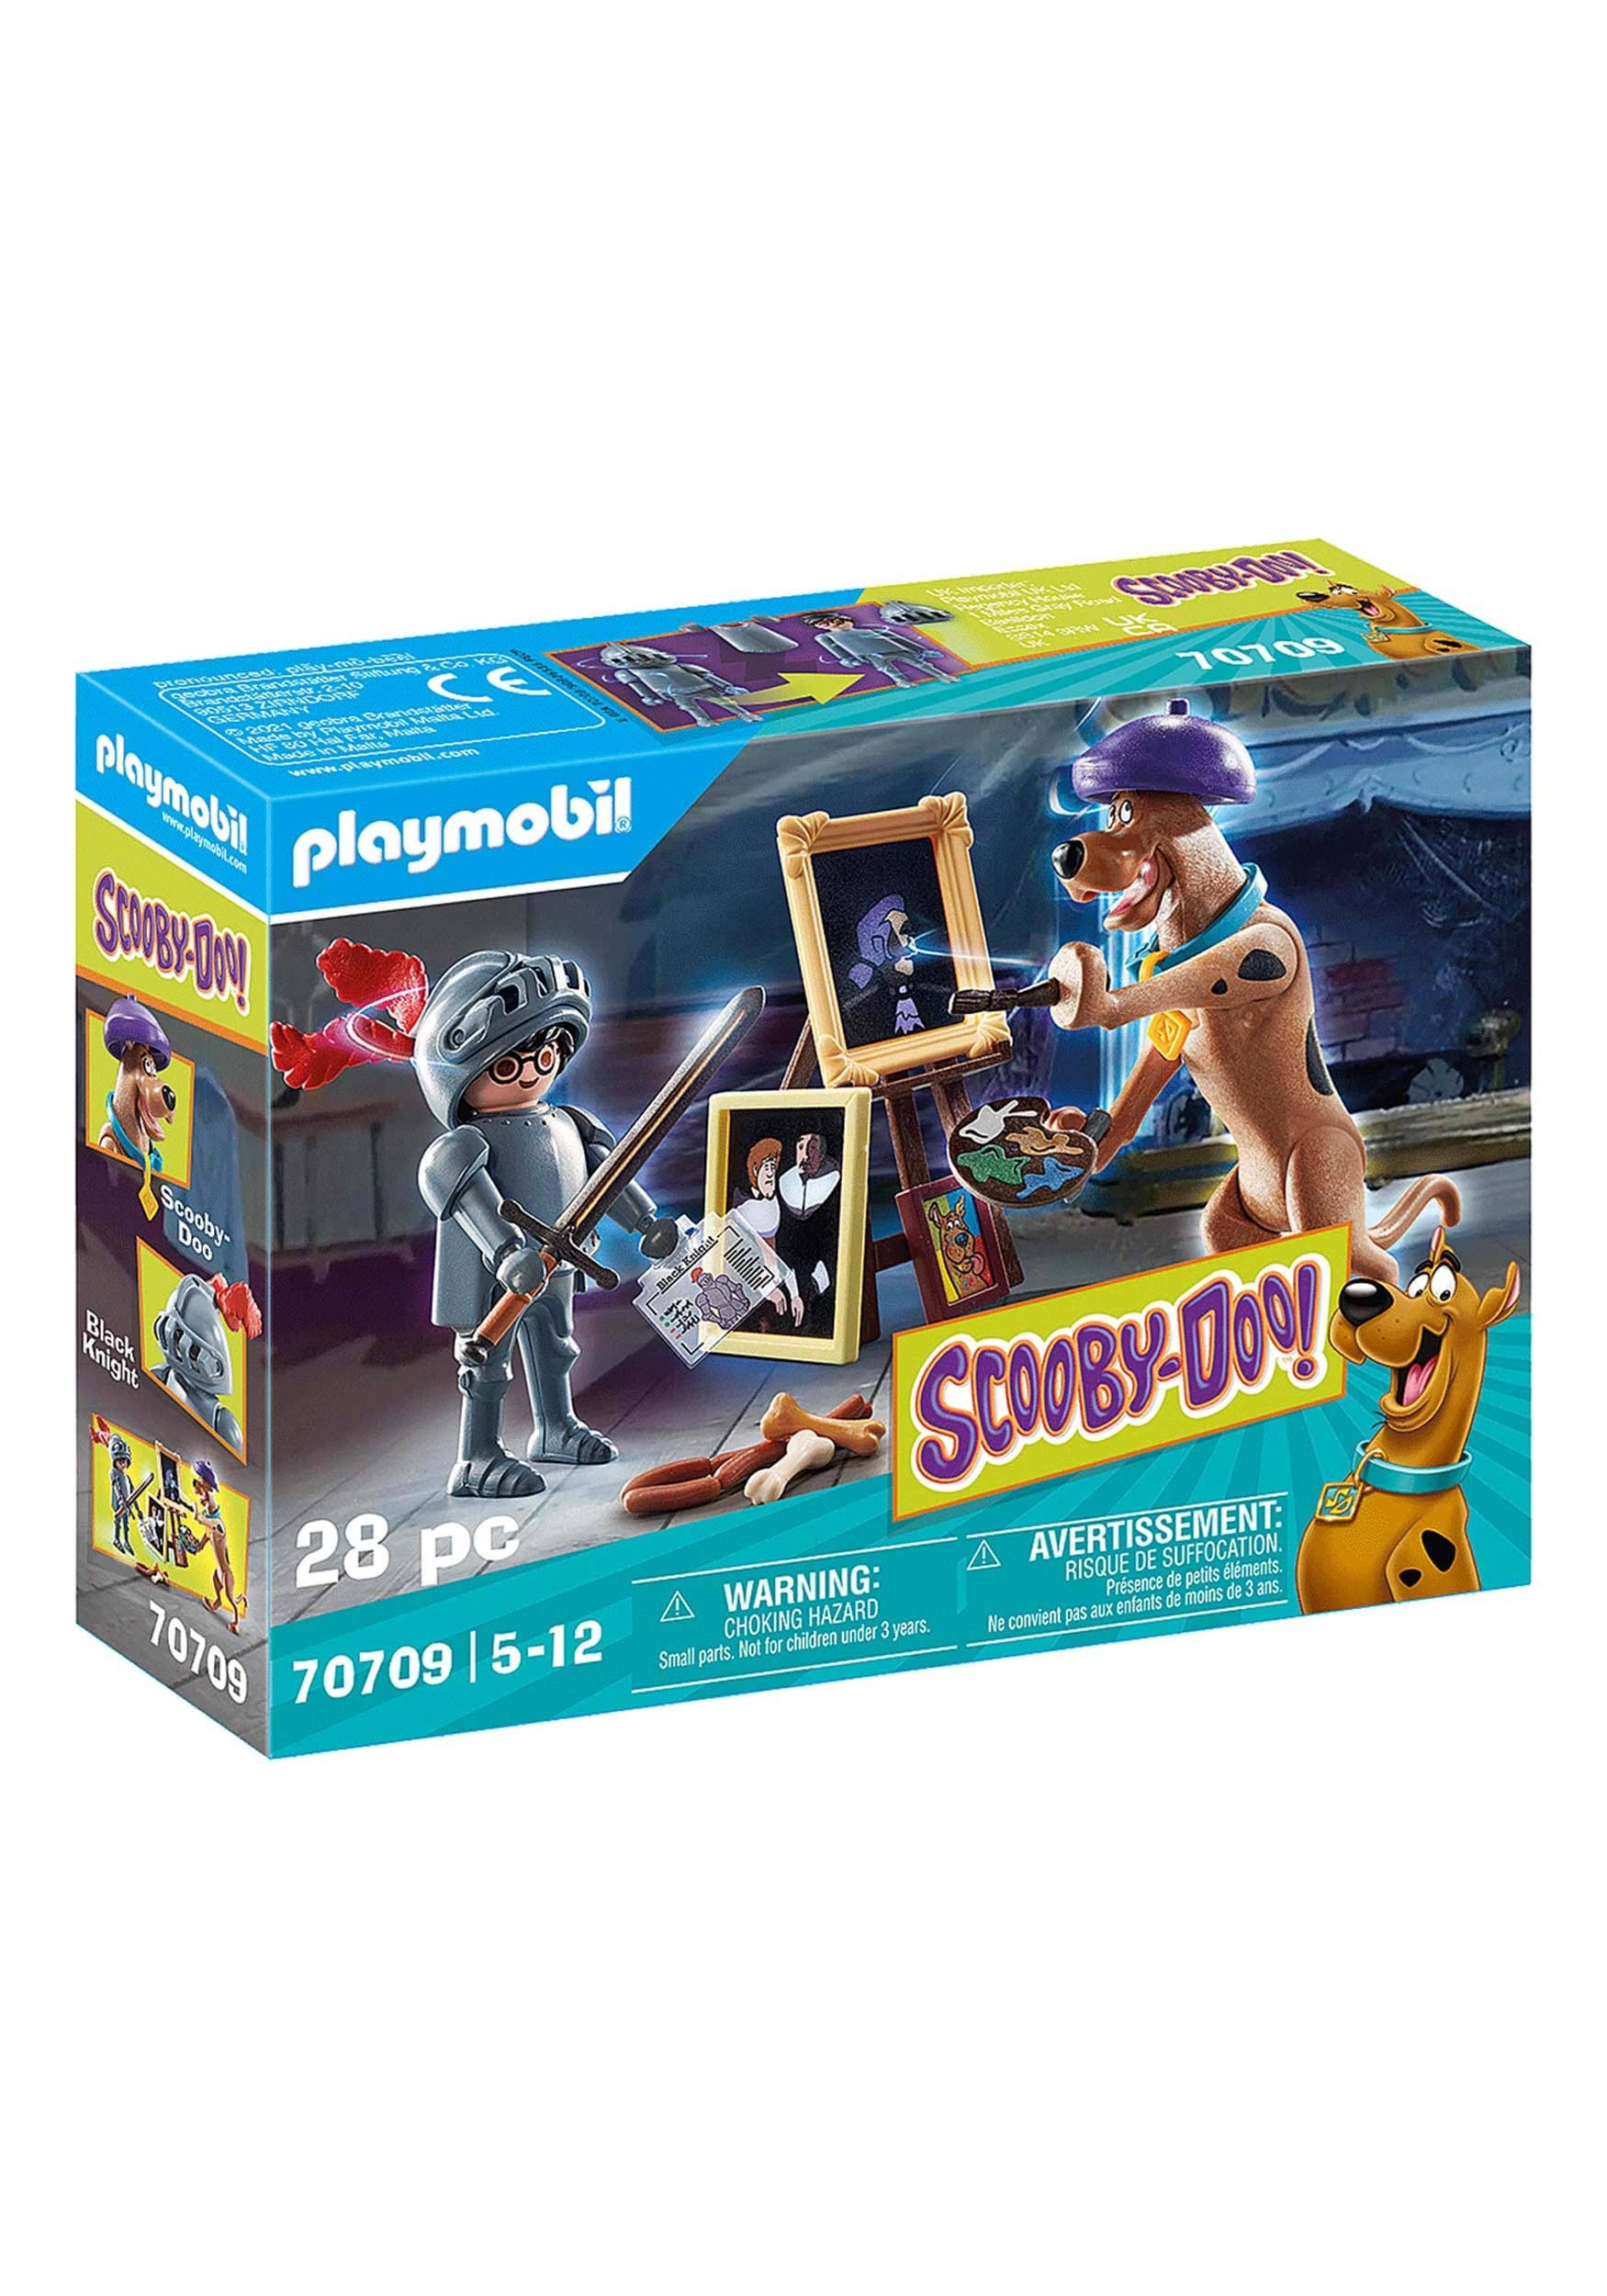 PLAYMOBIL 70709 - SCOOBY-DOO! Adventure with Black Knight